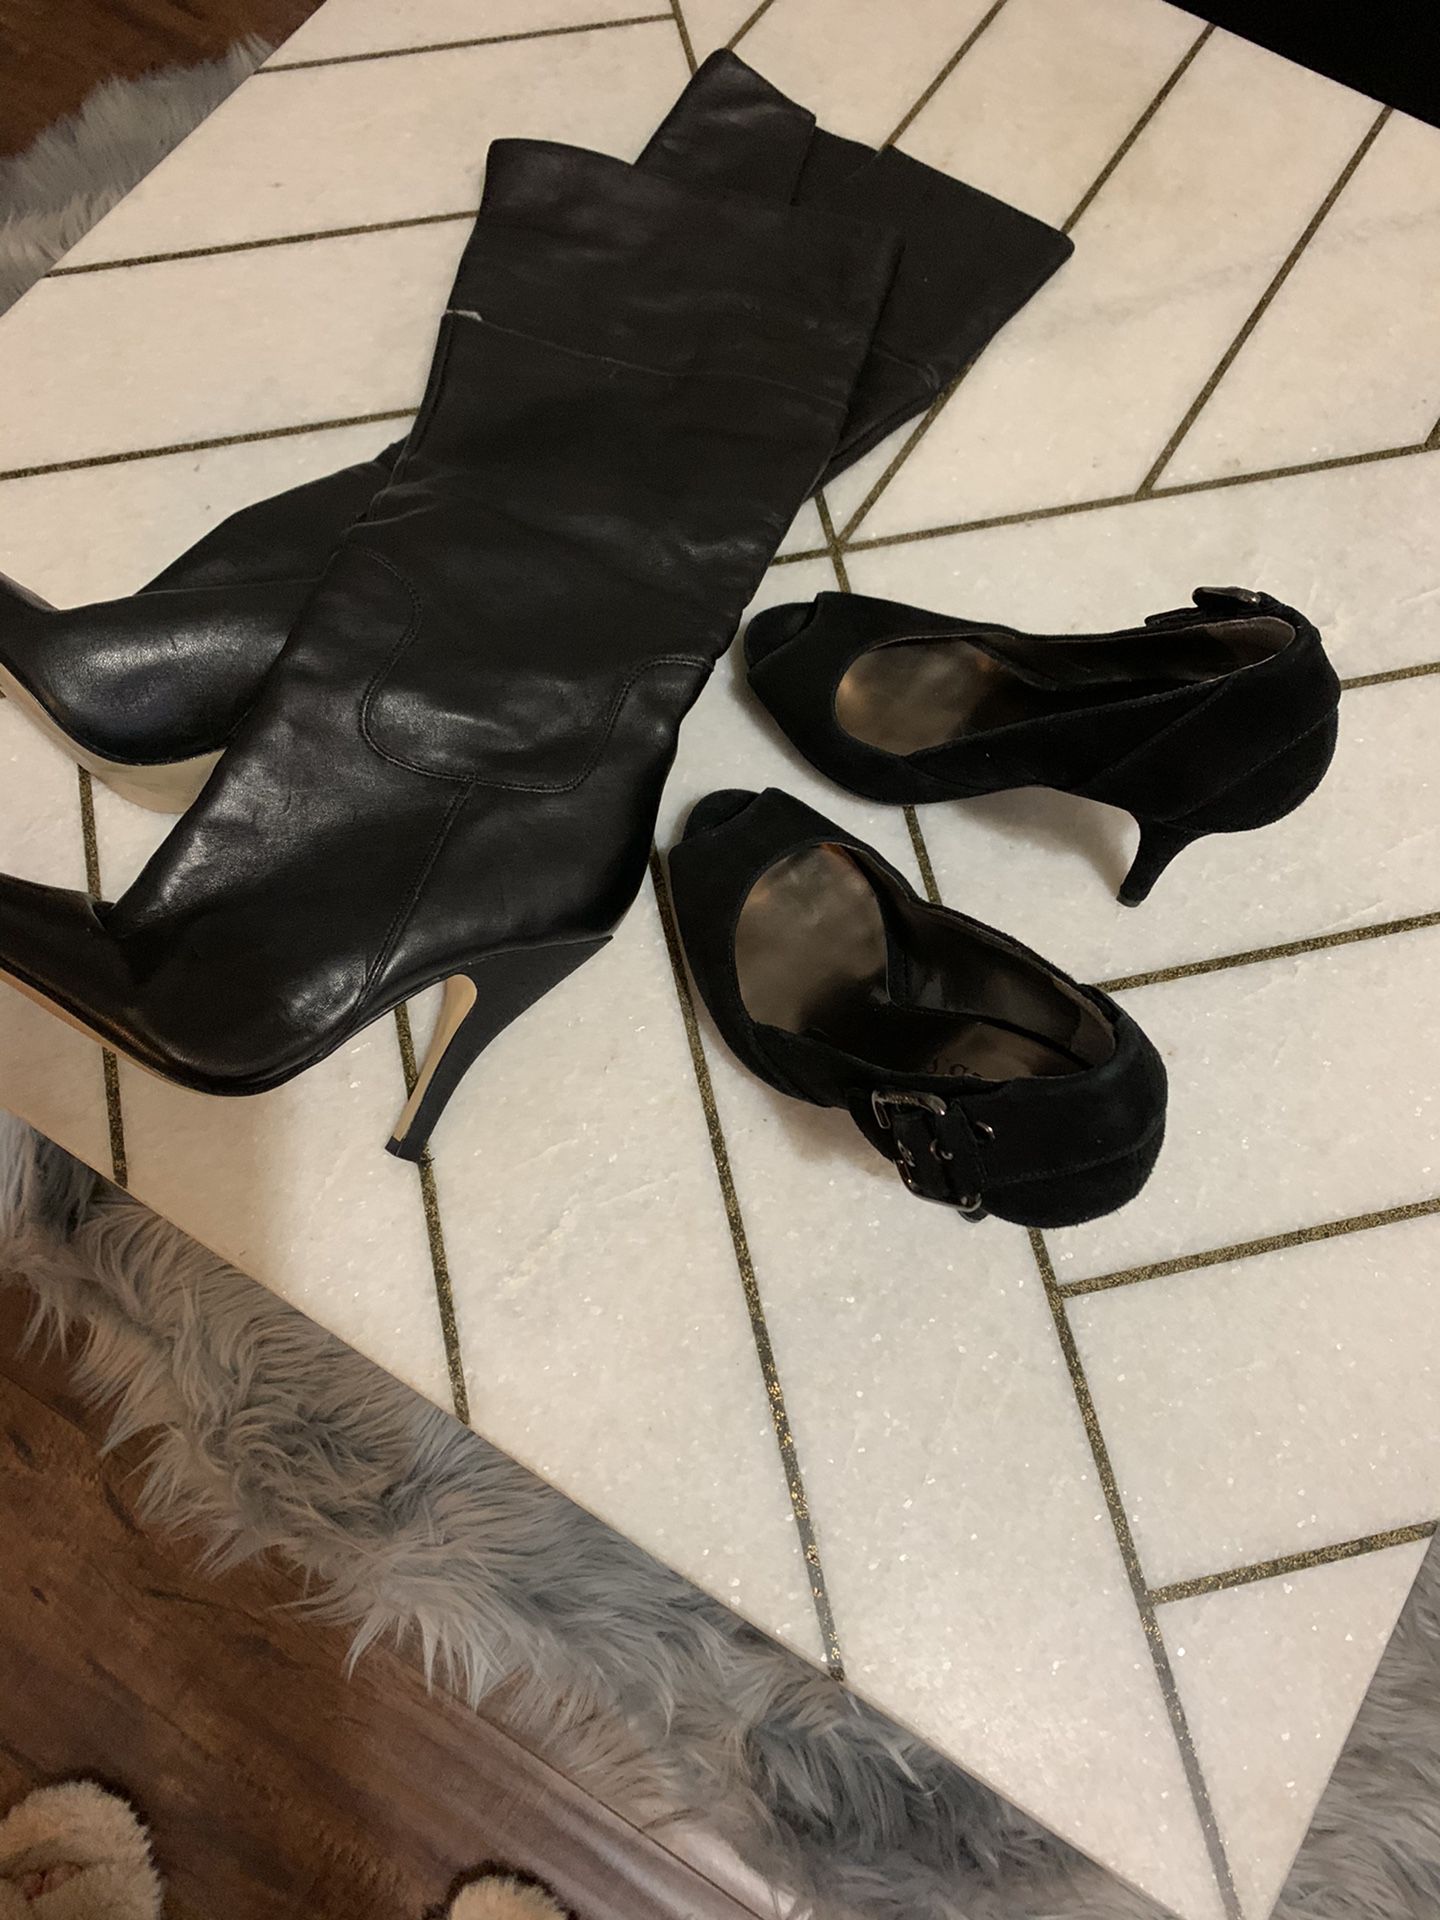 Lady’s guess leather boots n suede heels both size 6